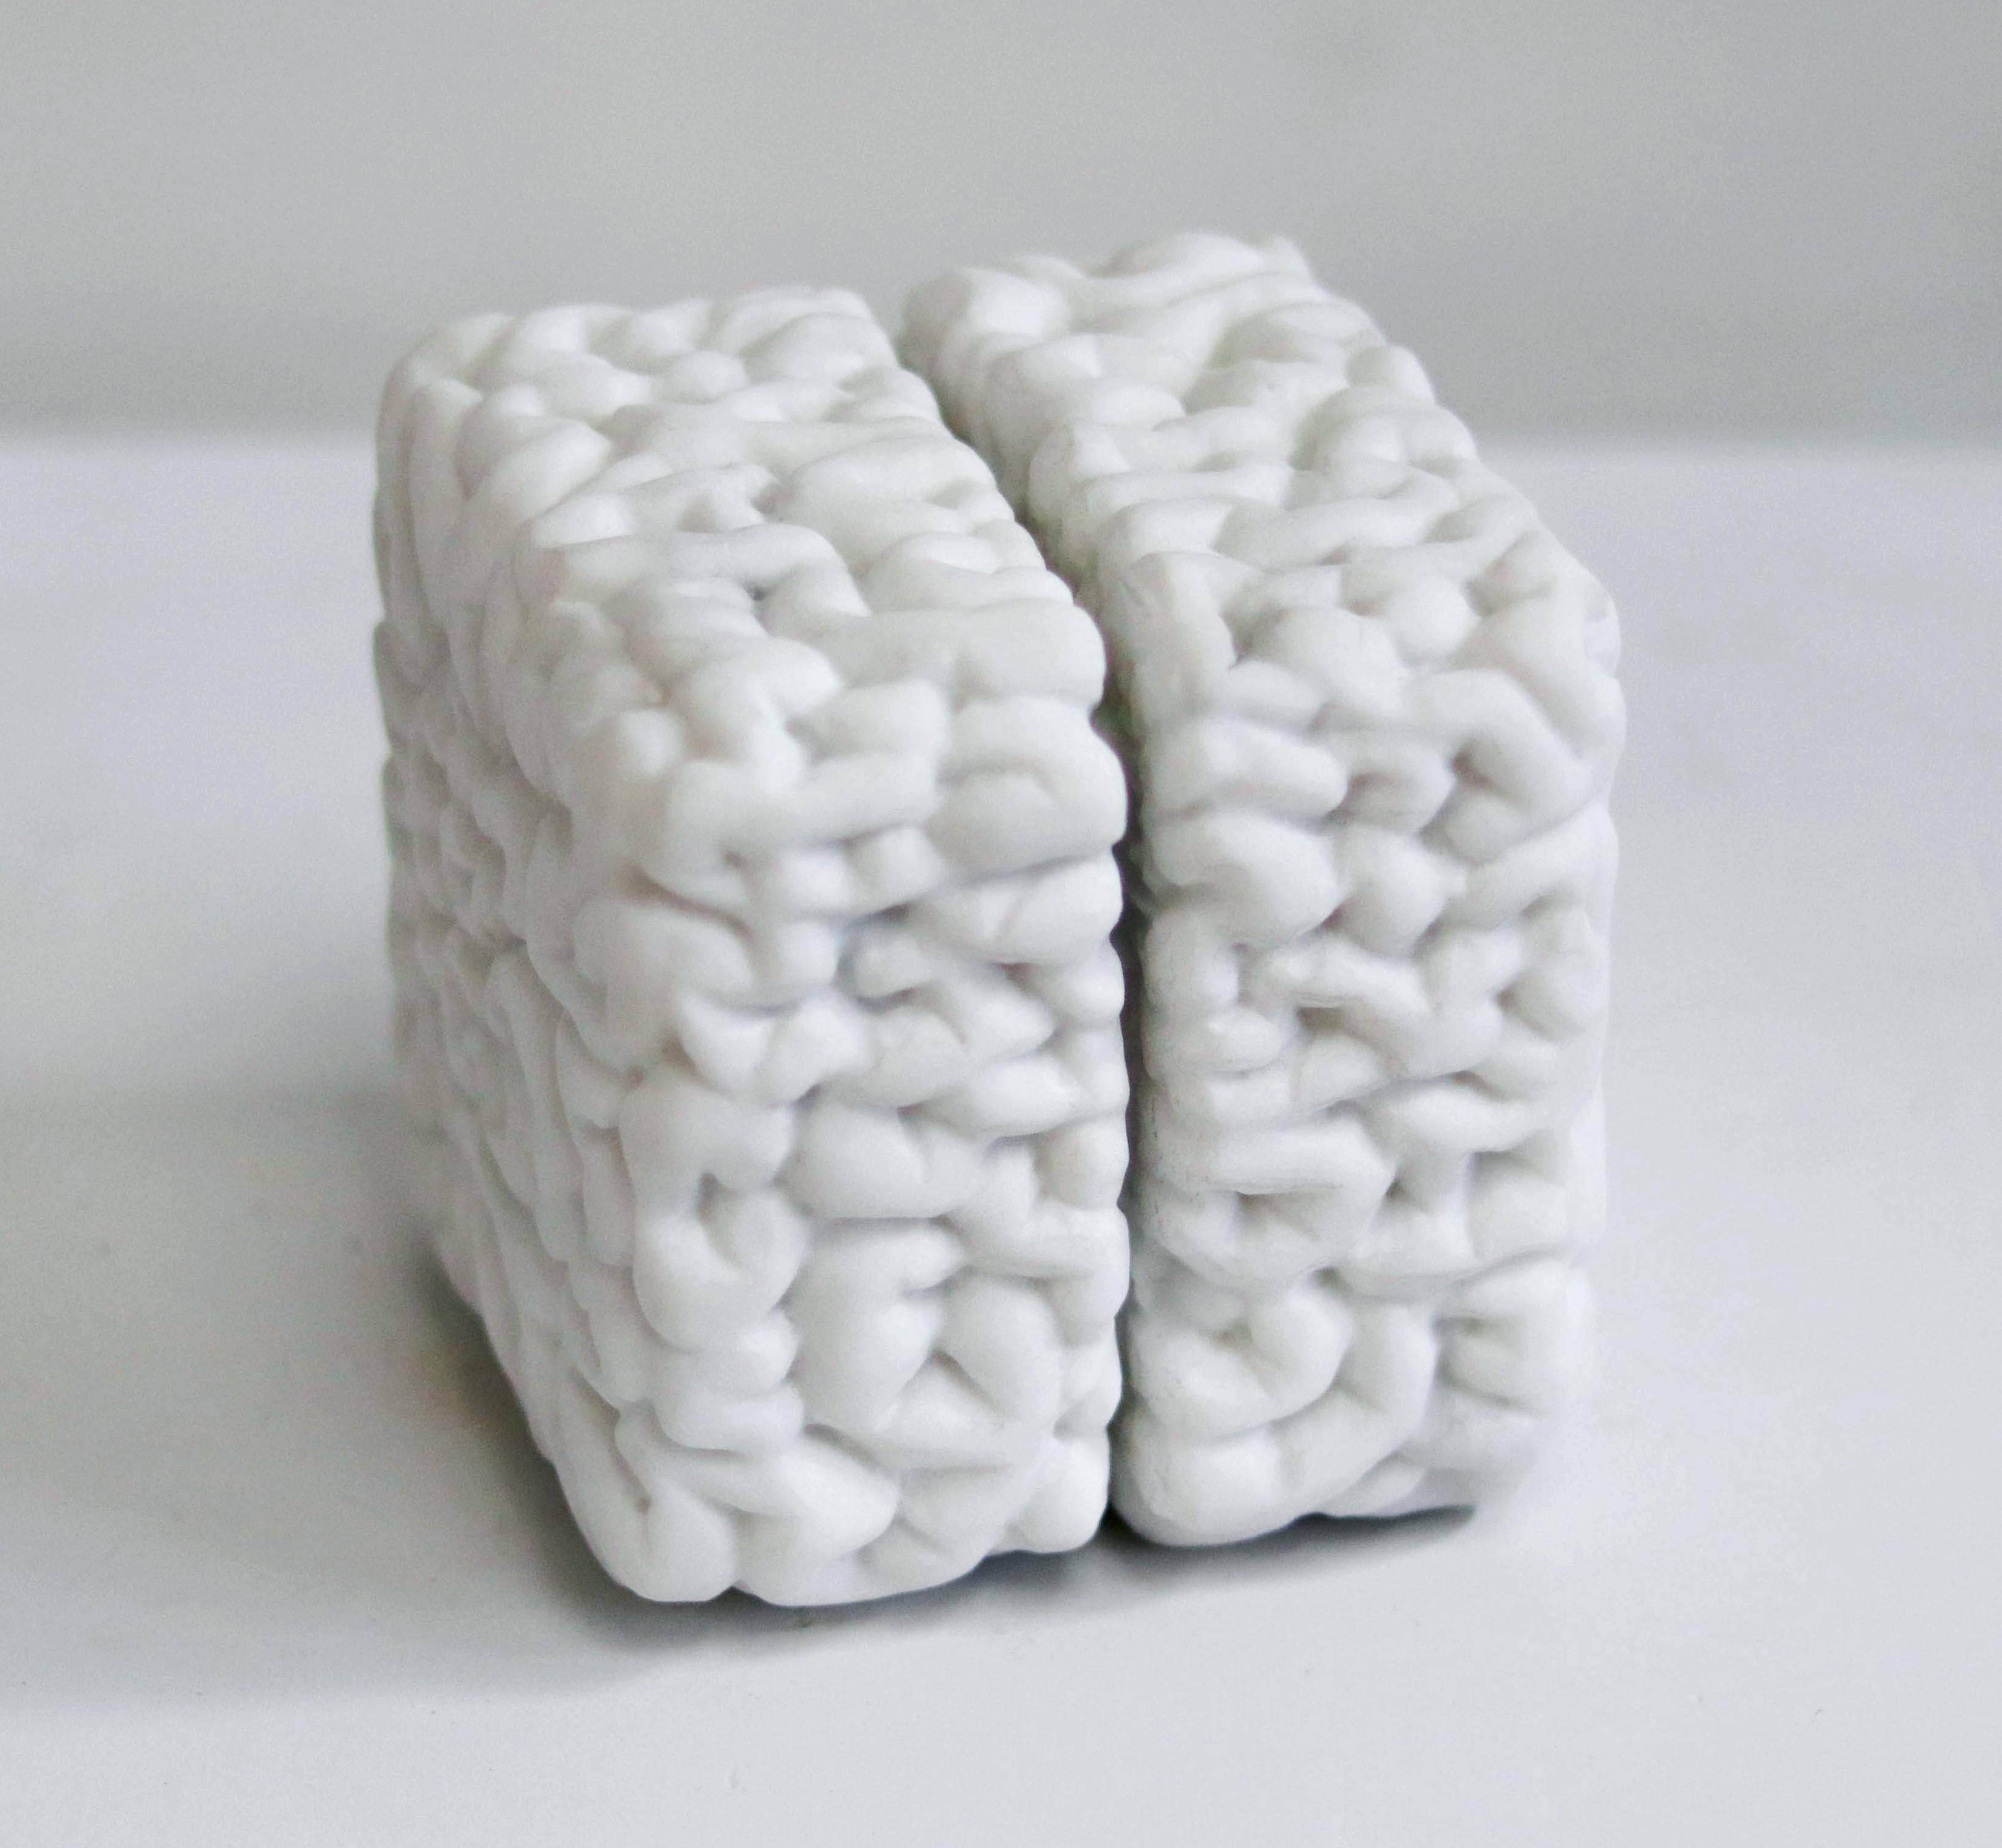 Carrara Marble Cubical Brain "To Be or Not To Be" - Sculpture by Vincent Du Bois